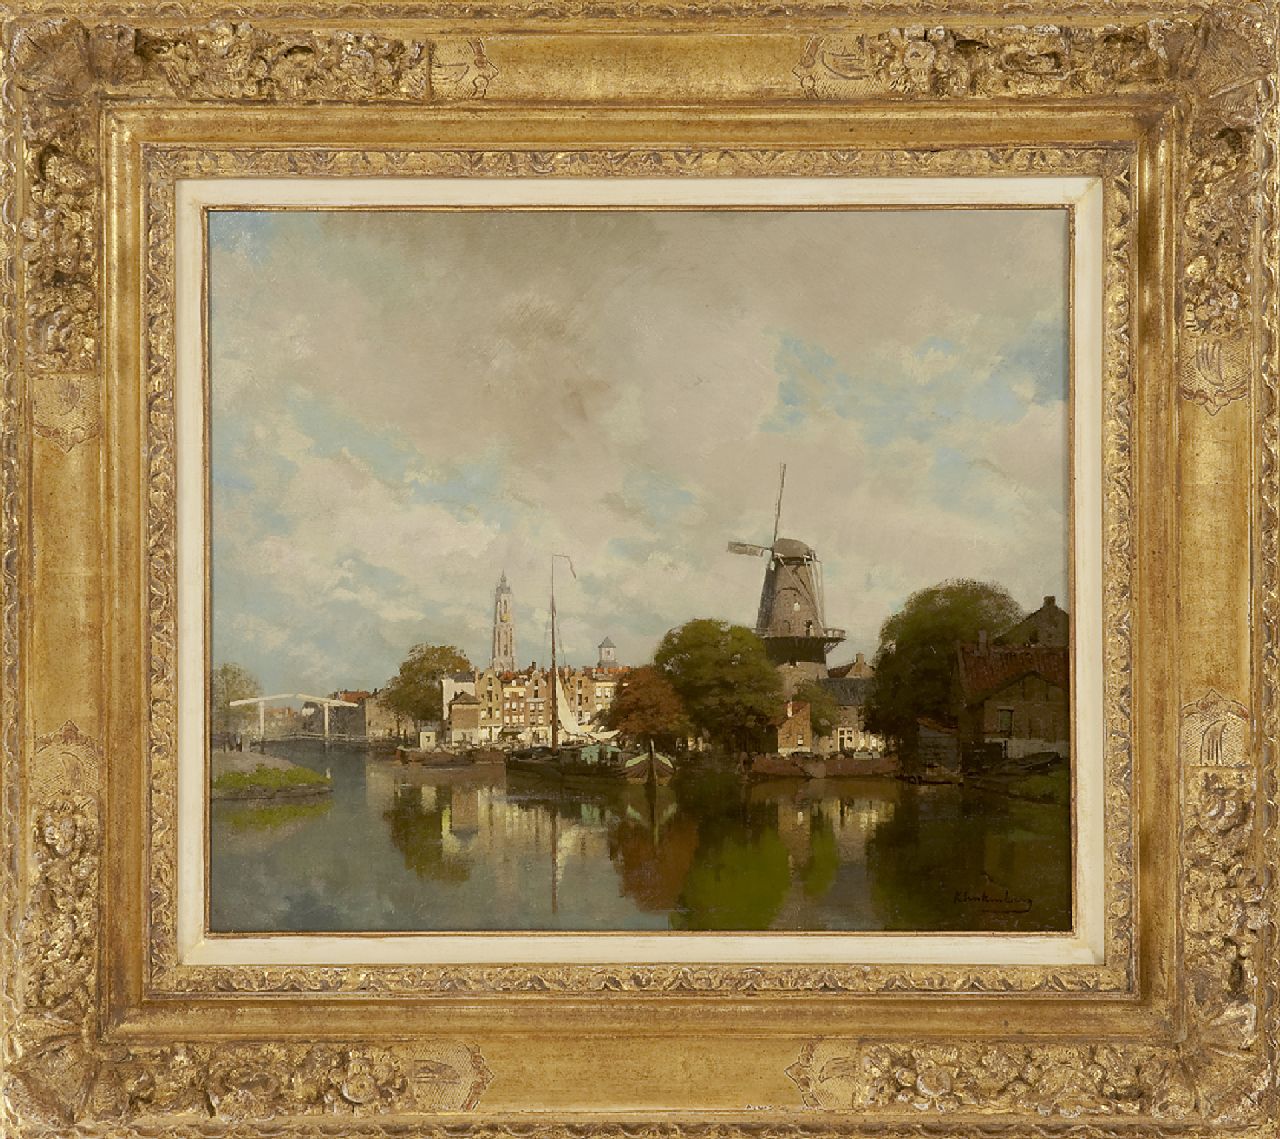 Klinkenberg J.C.K.  | Johannes Christiaan Karel Klinkenberg | Paintings offered for sale | A view of a town with the Groenmolen and tower of the Nieuwe Kerk of Delft, oil on canvas 39.5 x 47.4 cm, signed l.r.